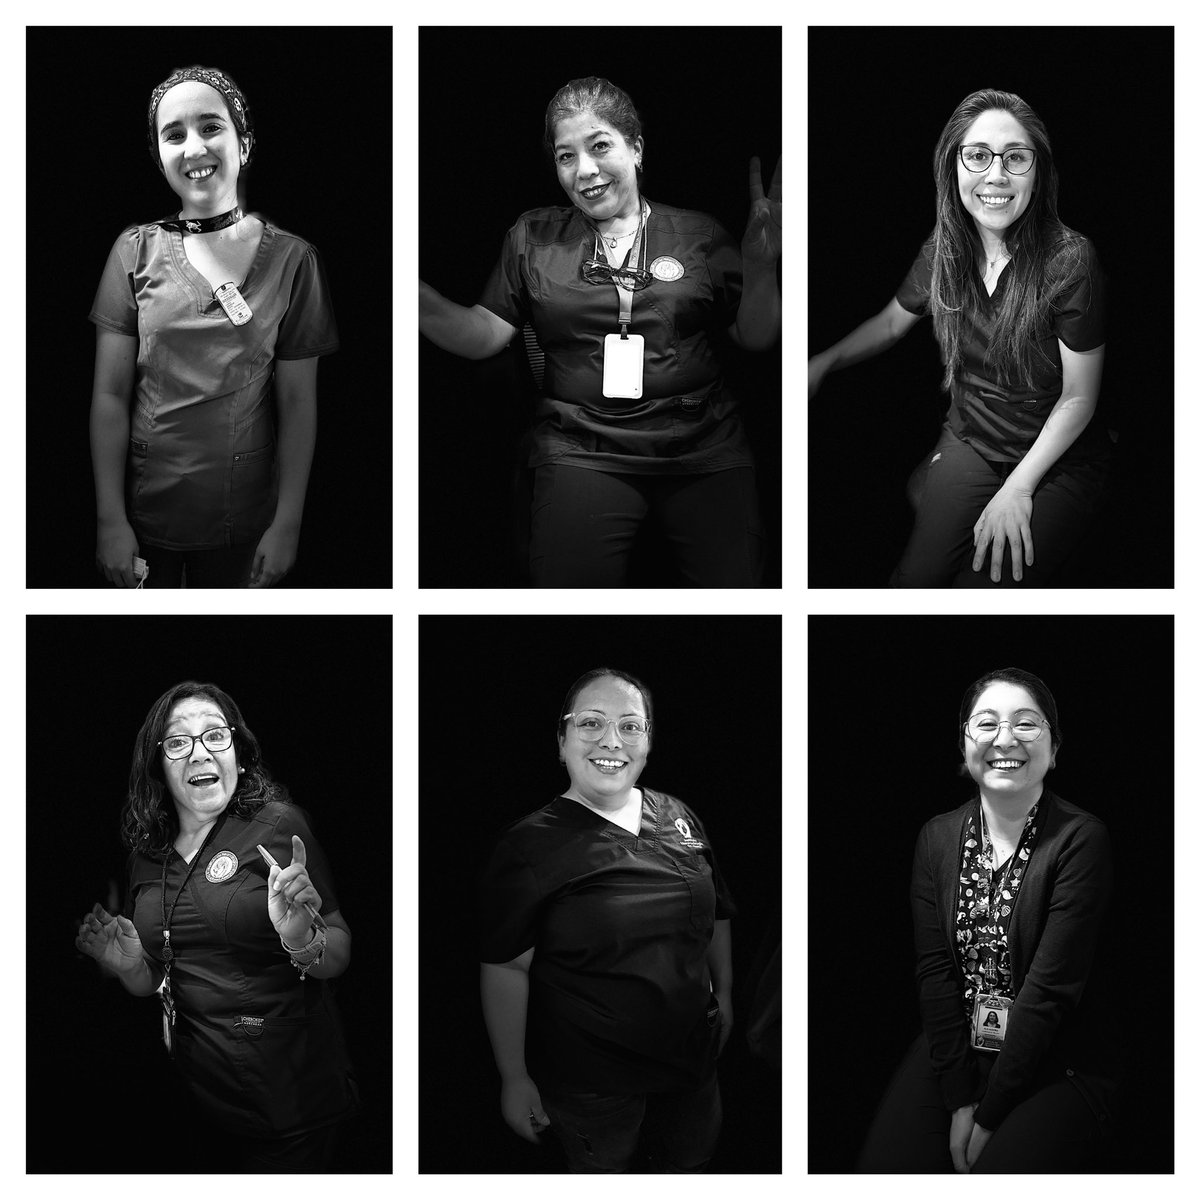 60% of our team are wonderful women. Our Neuroradiology department at @NeuroAsenjo has the honor to count with them. We are committed to bring a space of equality, development, opportunity and growth. @WomenInNeuroIR @LINNConline #8march #8marzo